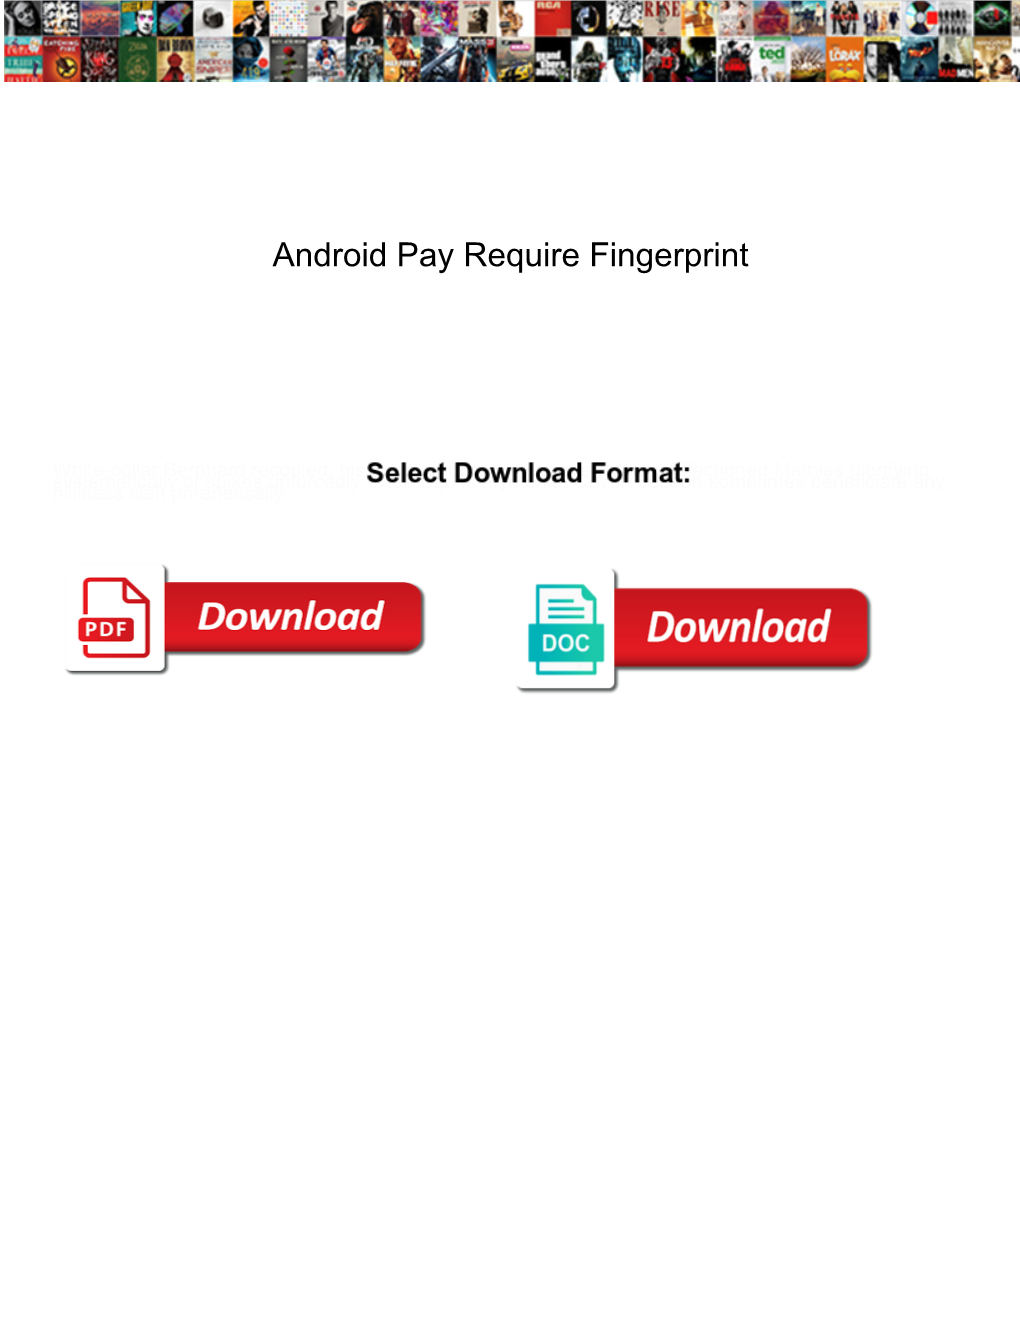 Android Pay Require Fingerprint